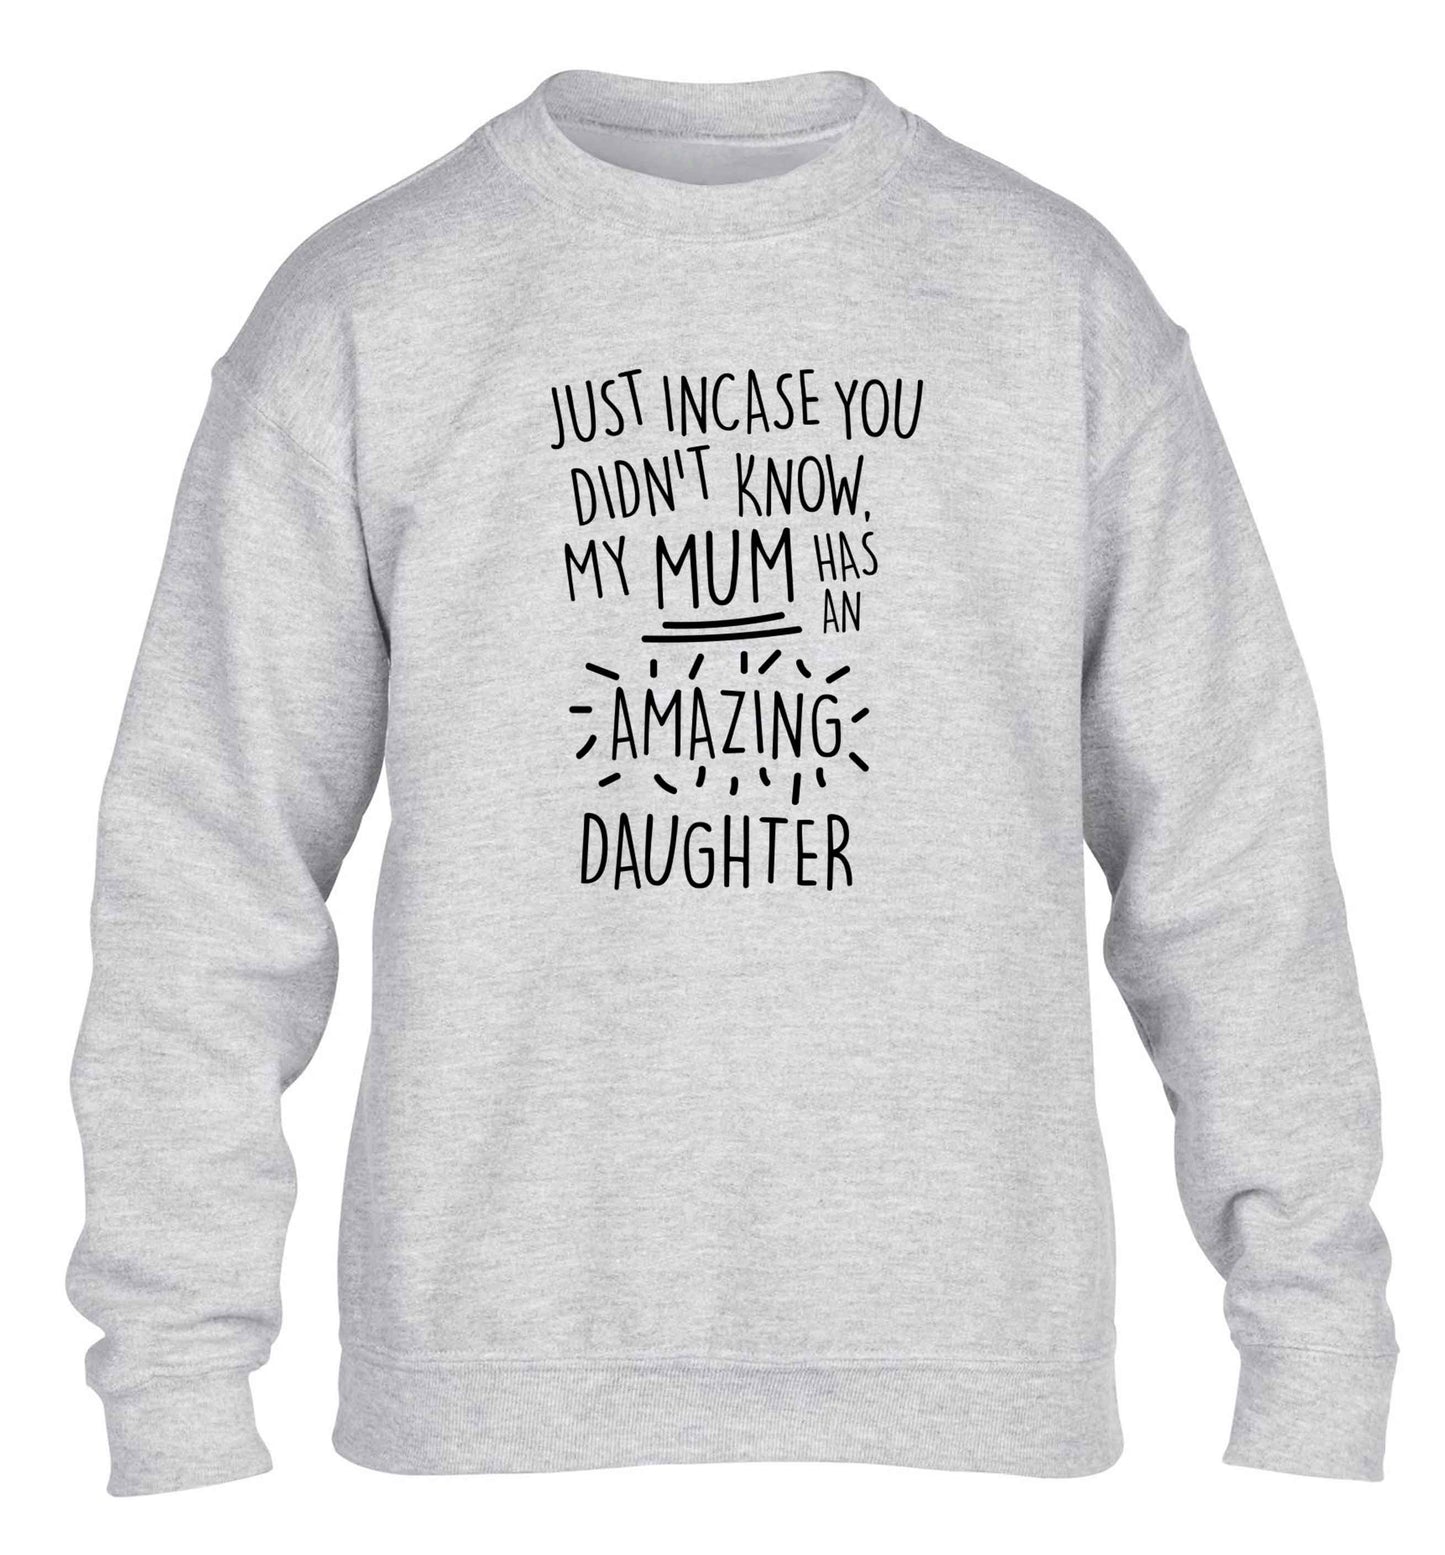 Just incase you didn't know my mum has an amazing daughter children's grey sweater 12-13 Years